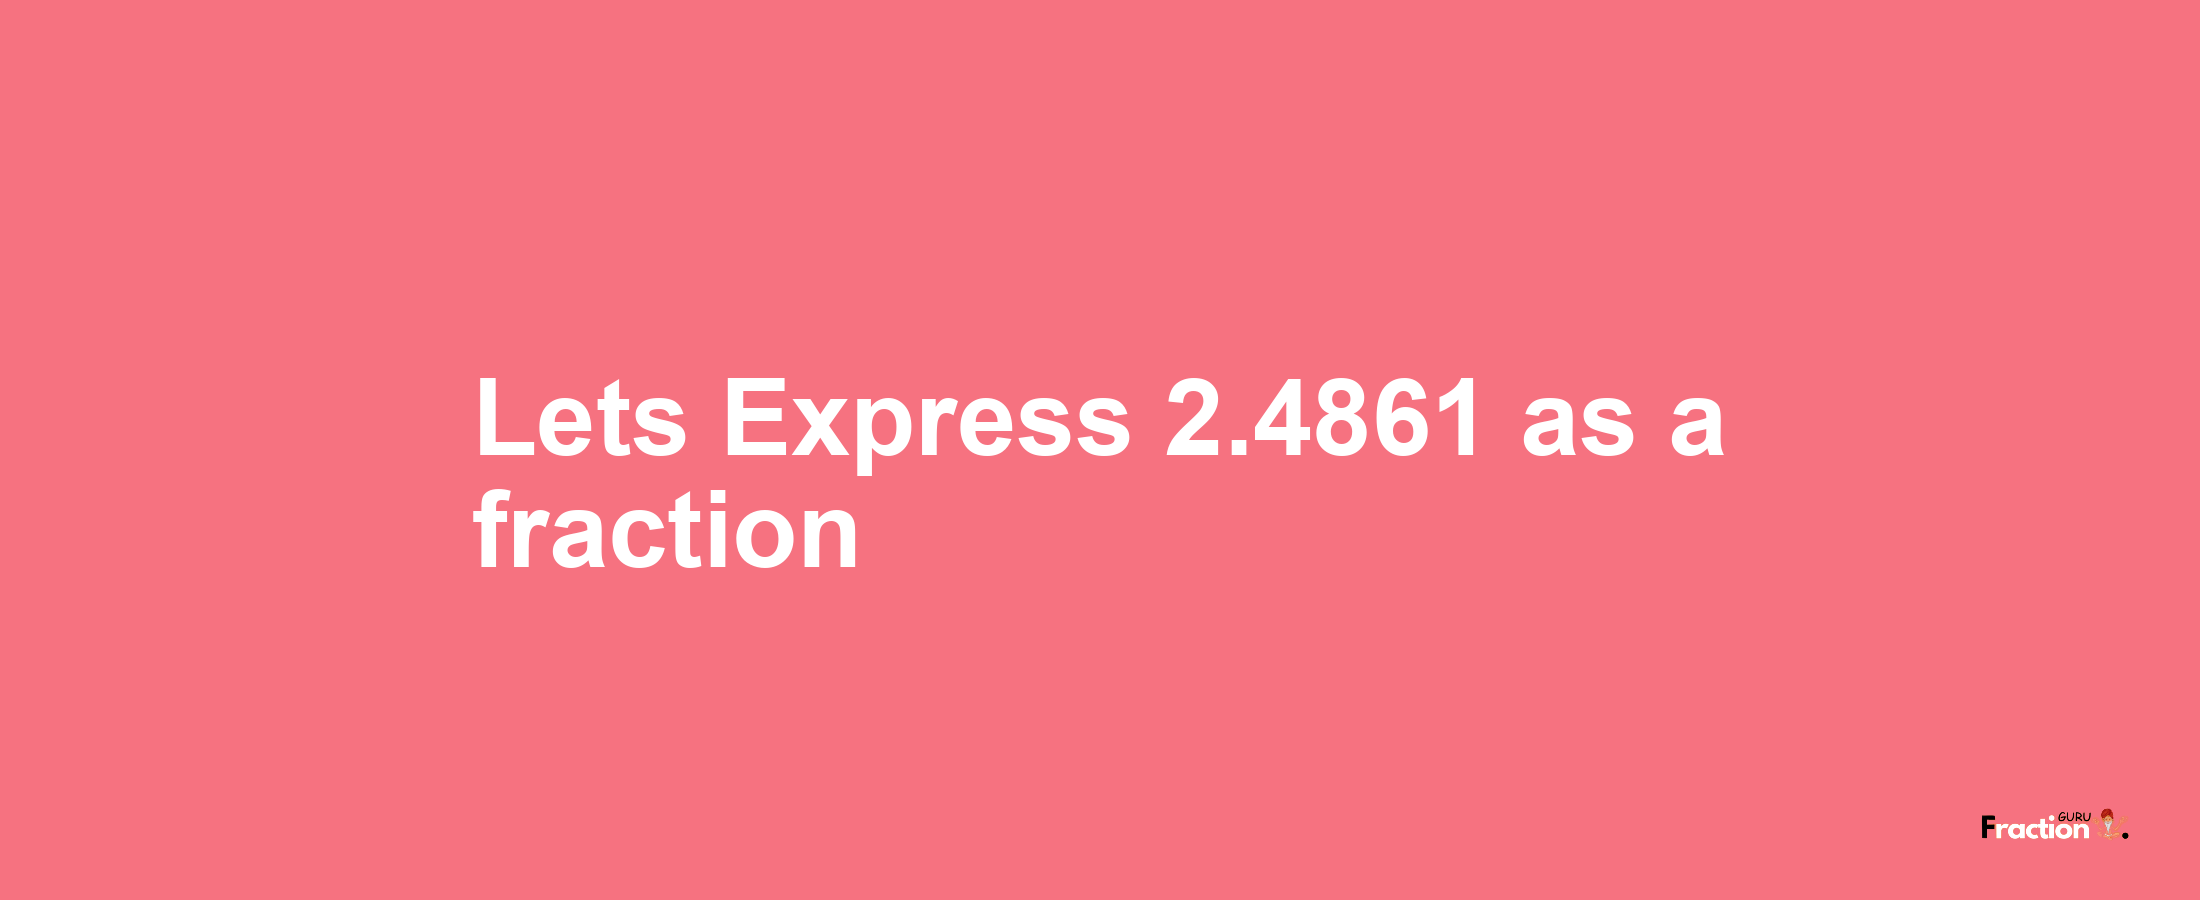 Lets Express 2.4861 as afraction